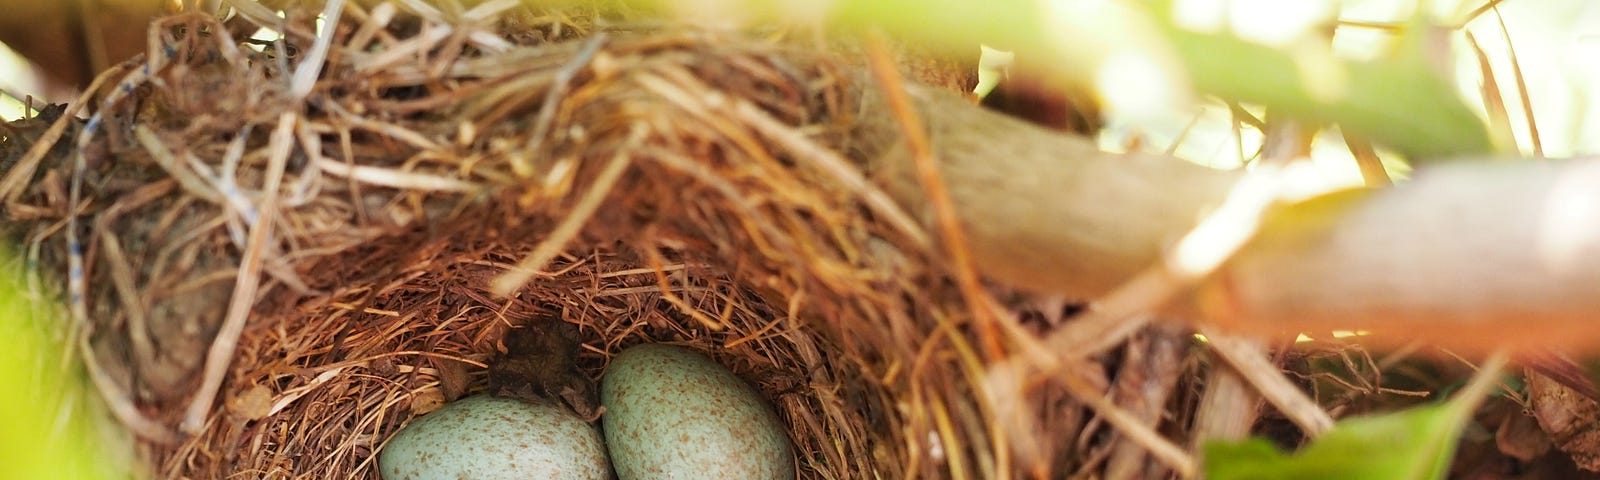 WRITING TIP AND TRICKS Dear Writer, You Really Do Not Have to Write for Every Publication That Accepts You as A Writer Choose carefully, find the right home for your work. The image shows a bird’s nest with four eggs in it. The eggs are speckled blue.